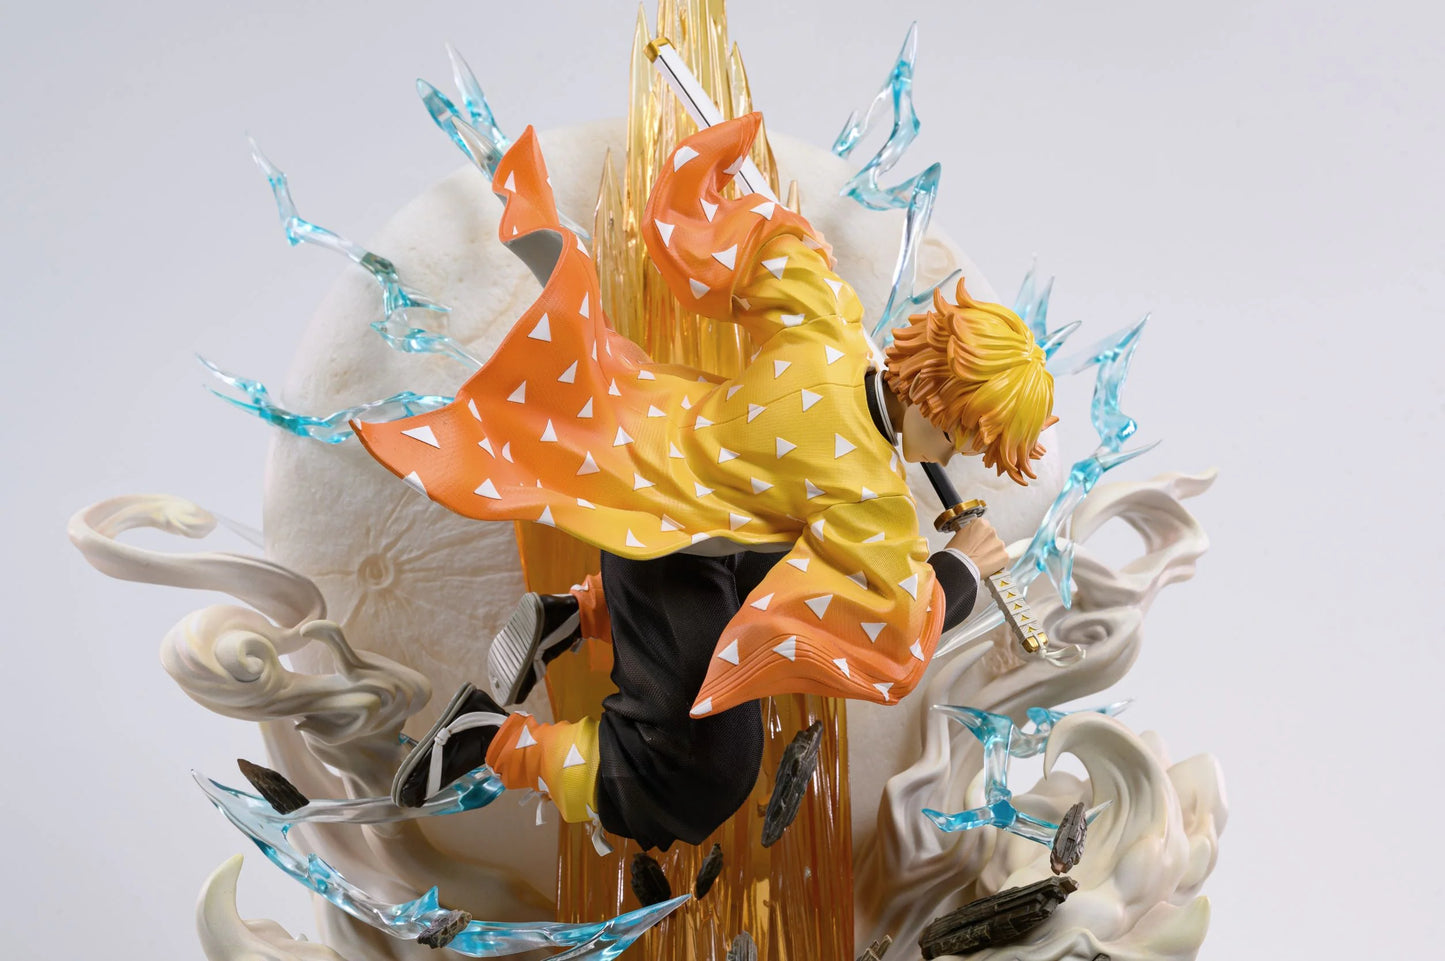 Load image into Gallery viewer, Zenitsu Agatsuma (Demon Slayer) GEE Light-Up 1:5 Scale Statue
